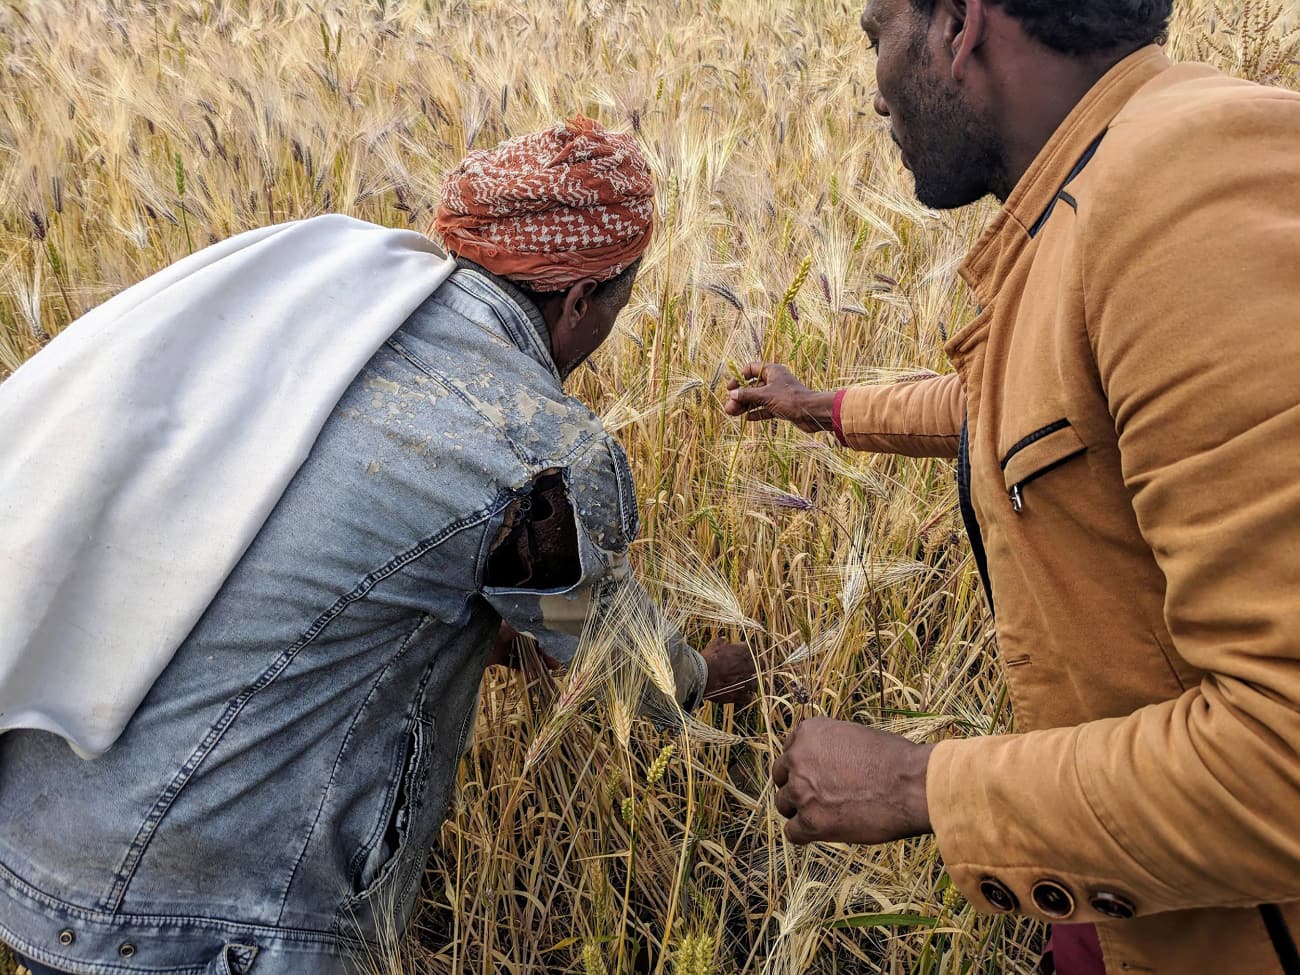 A researcher and farmer working together on sustainable agricultural production in Ethiopia, Photo credit Alex McAlvay